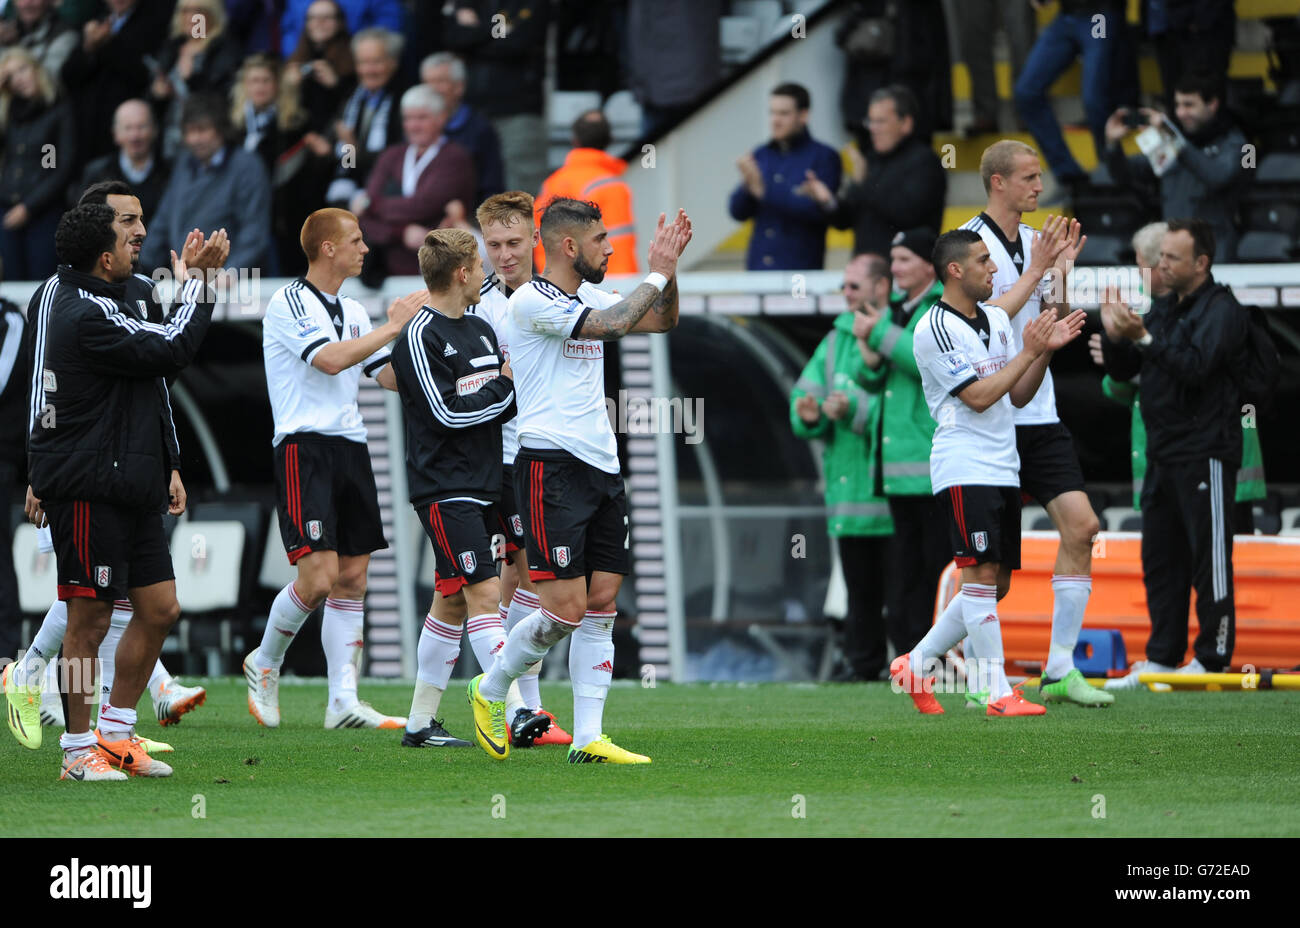 Soccer - Barclays Premier League - Fulham v Crystal Palace - Craven Cottage. Fulham's players applaud the home fans Stock Photo